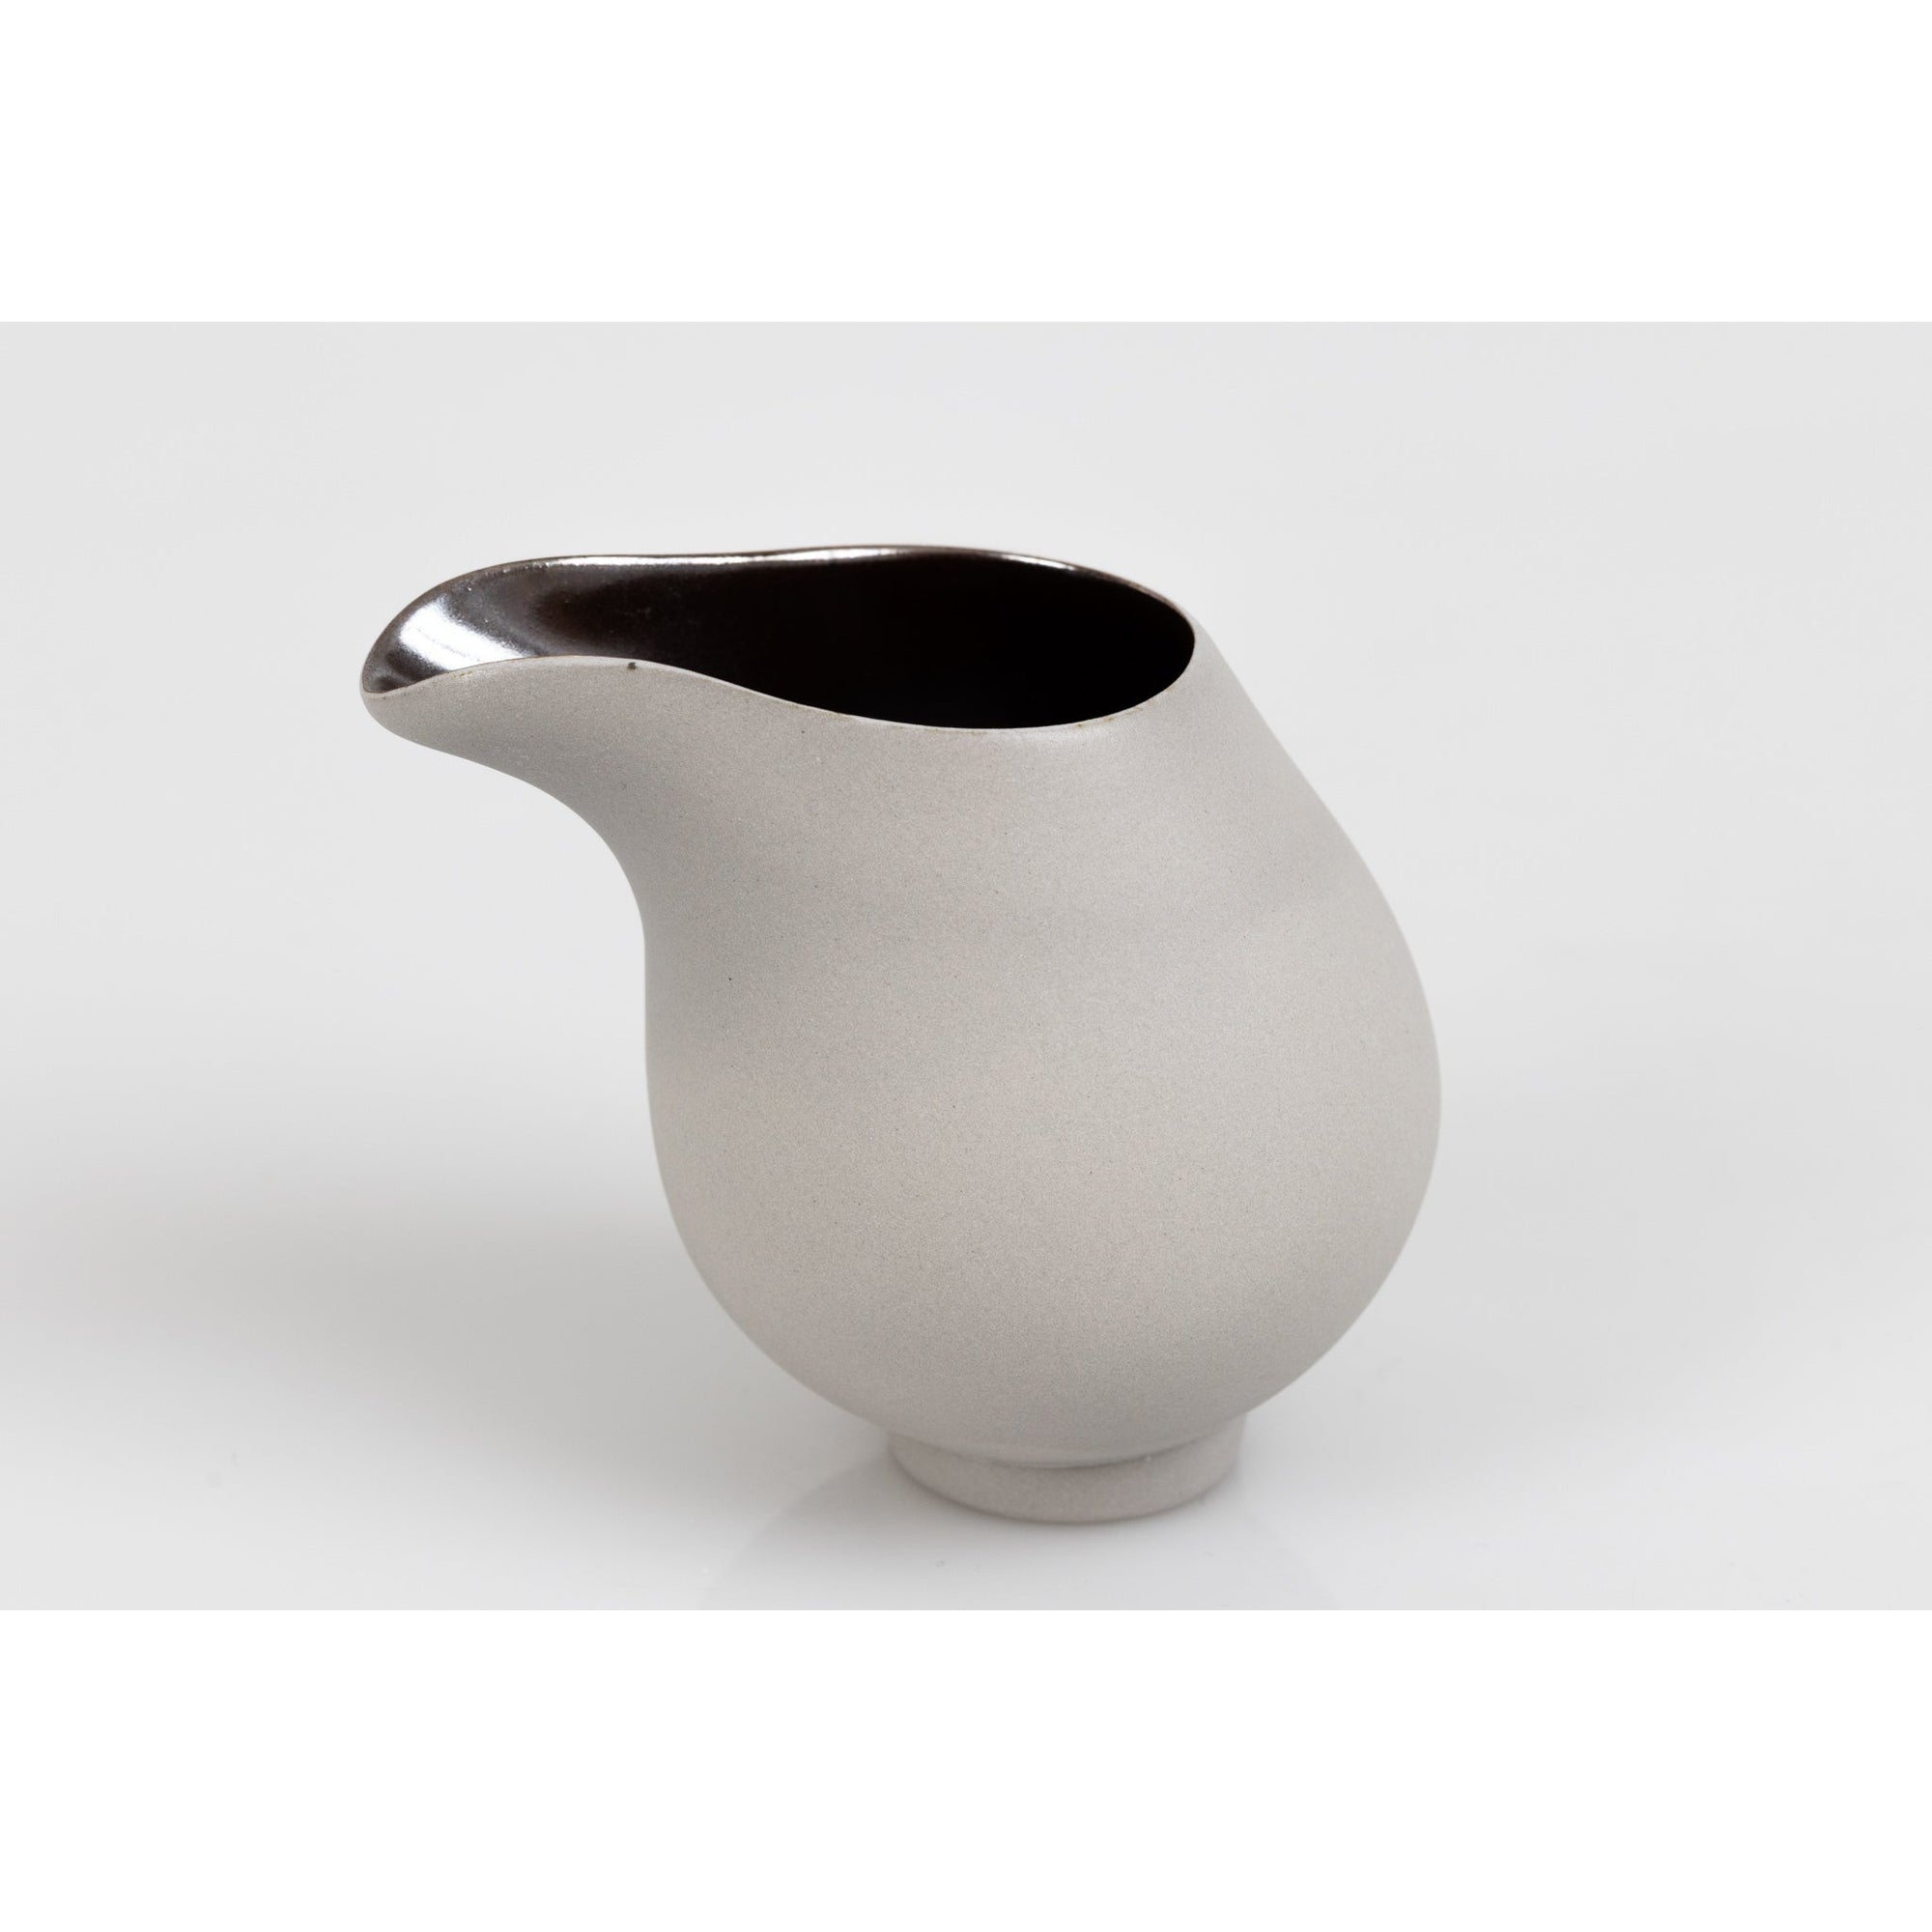 KSD3 Flow, Pale Grey Stoneware Jug by Kate Schuricht, available at Padstow Gallery, Cornwall